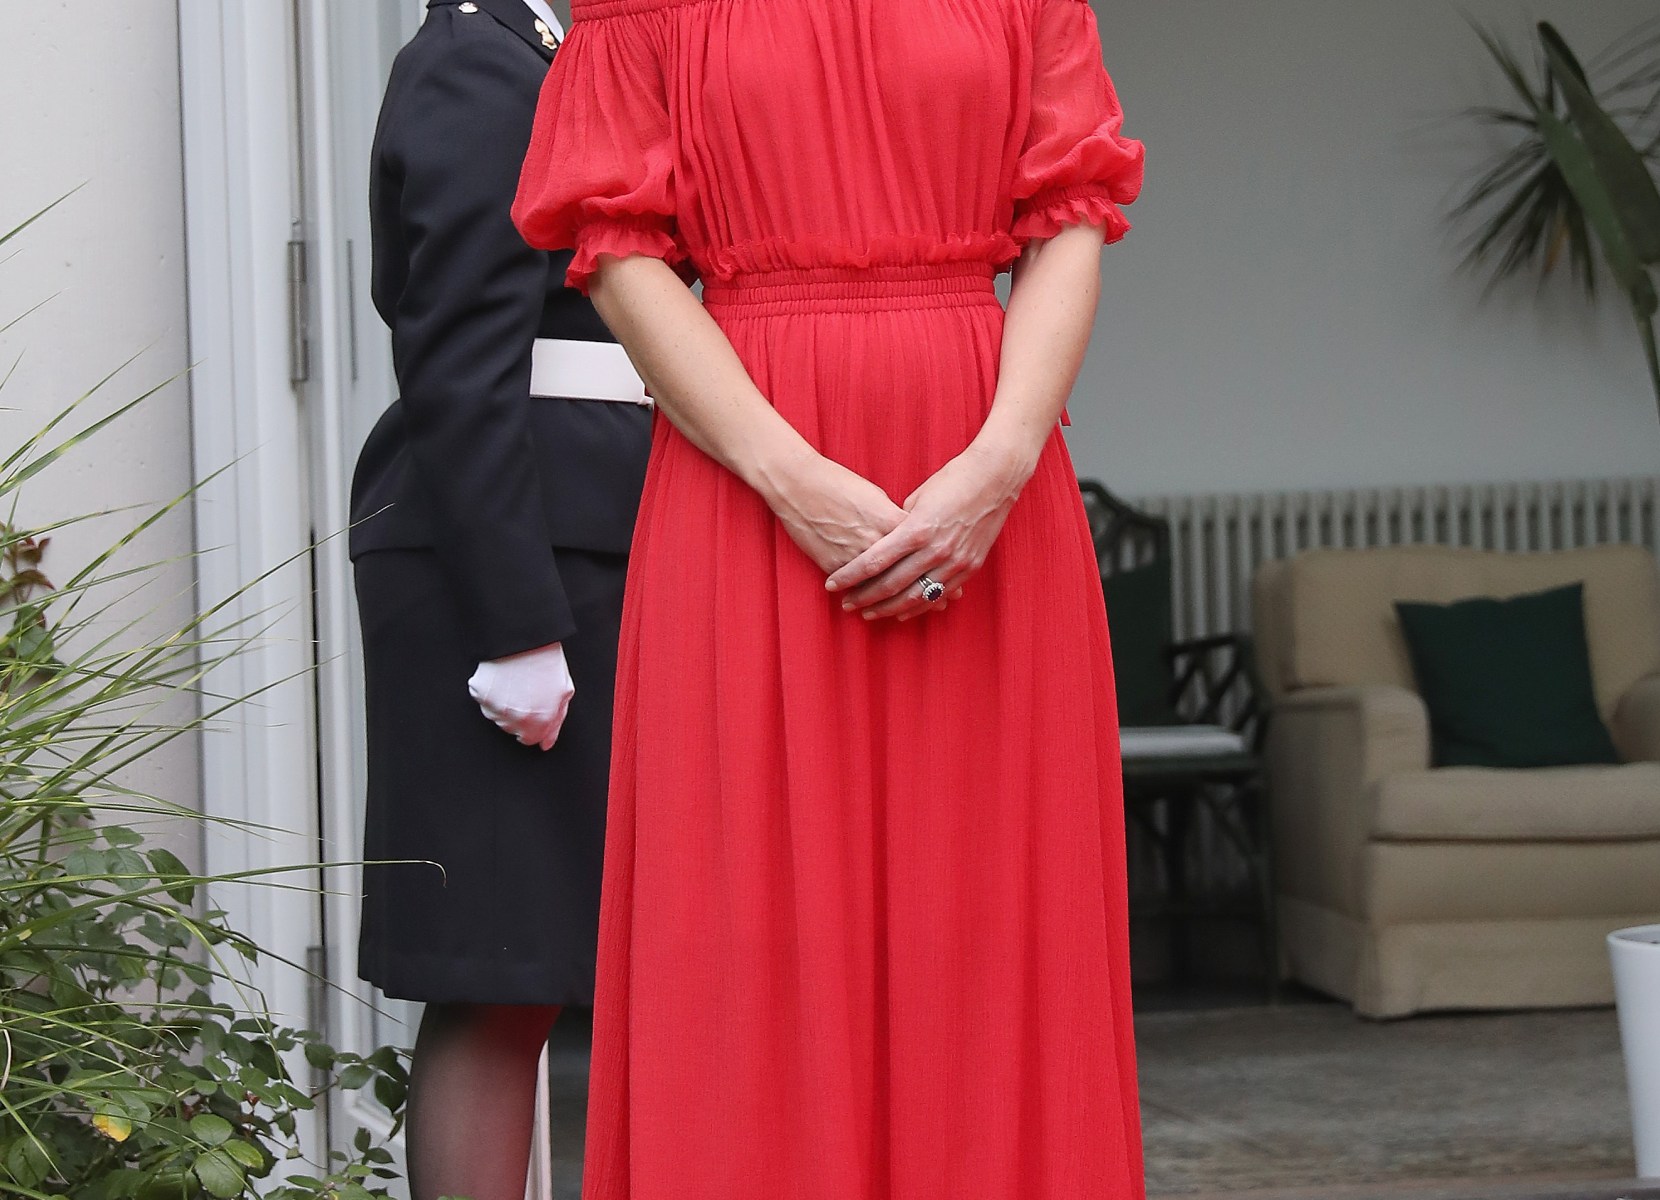 Kate Middletons Low Cut Red Dress Steals The Show During Germany Royal